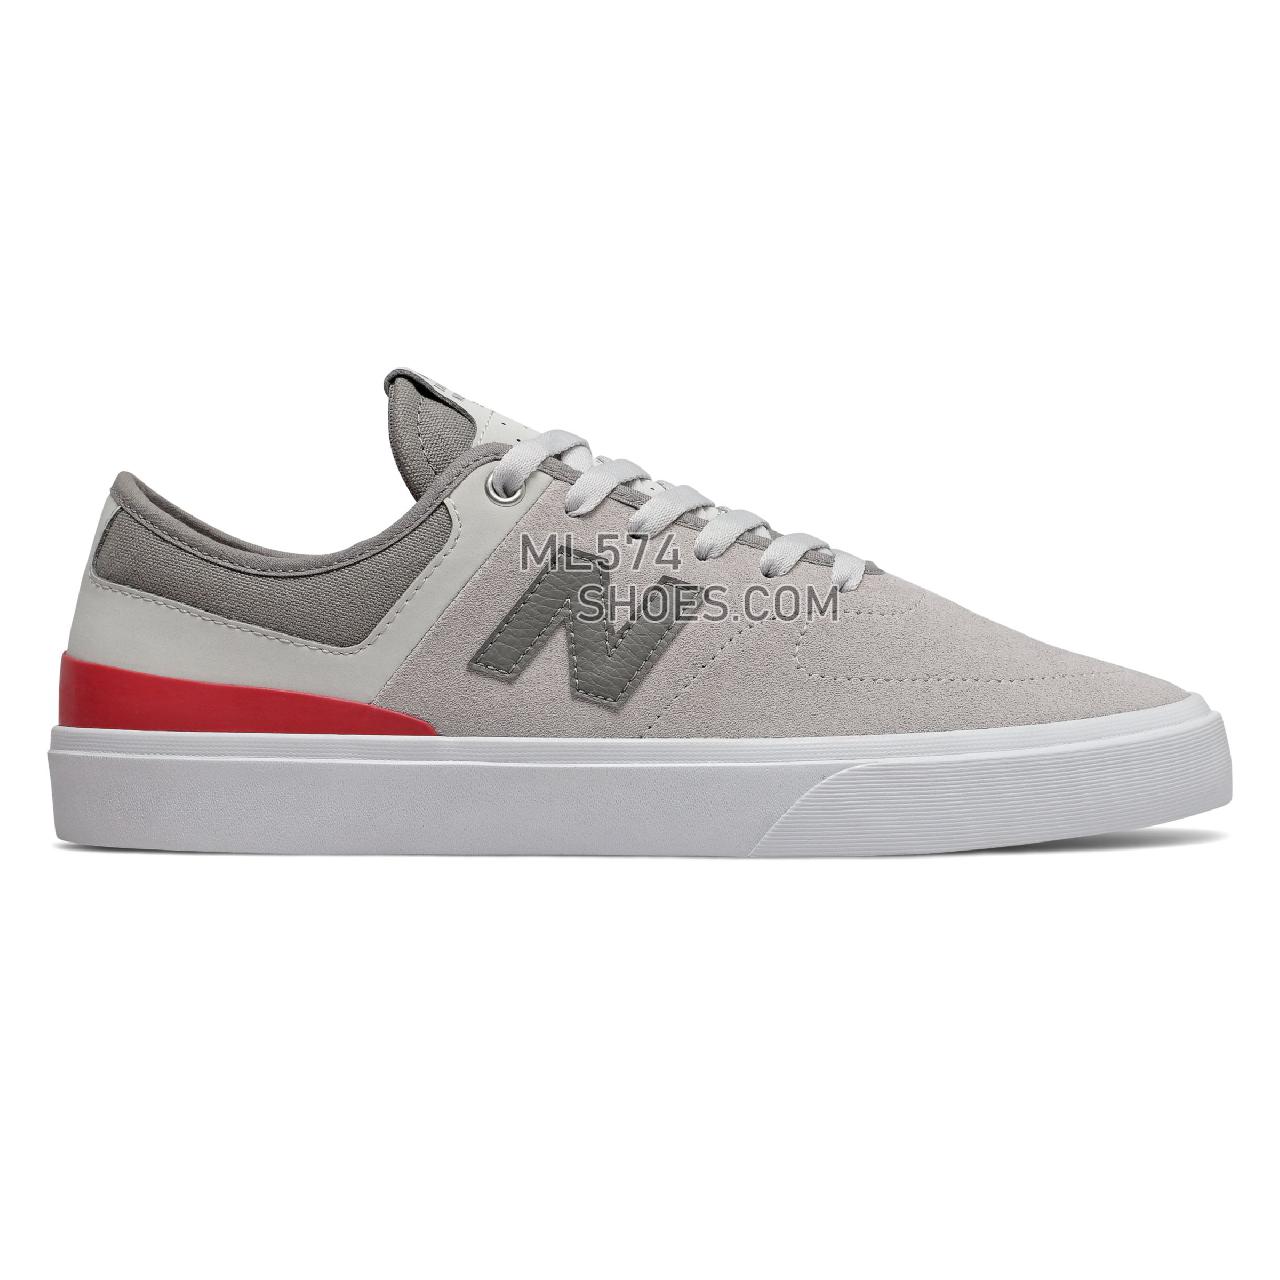 New Balance Numeric 379 - Men's NB Numeric Skate - Grey with Red and White - NM379GRE